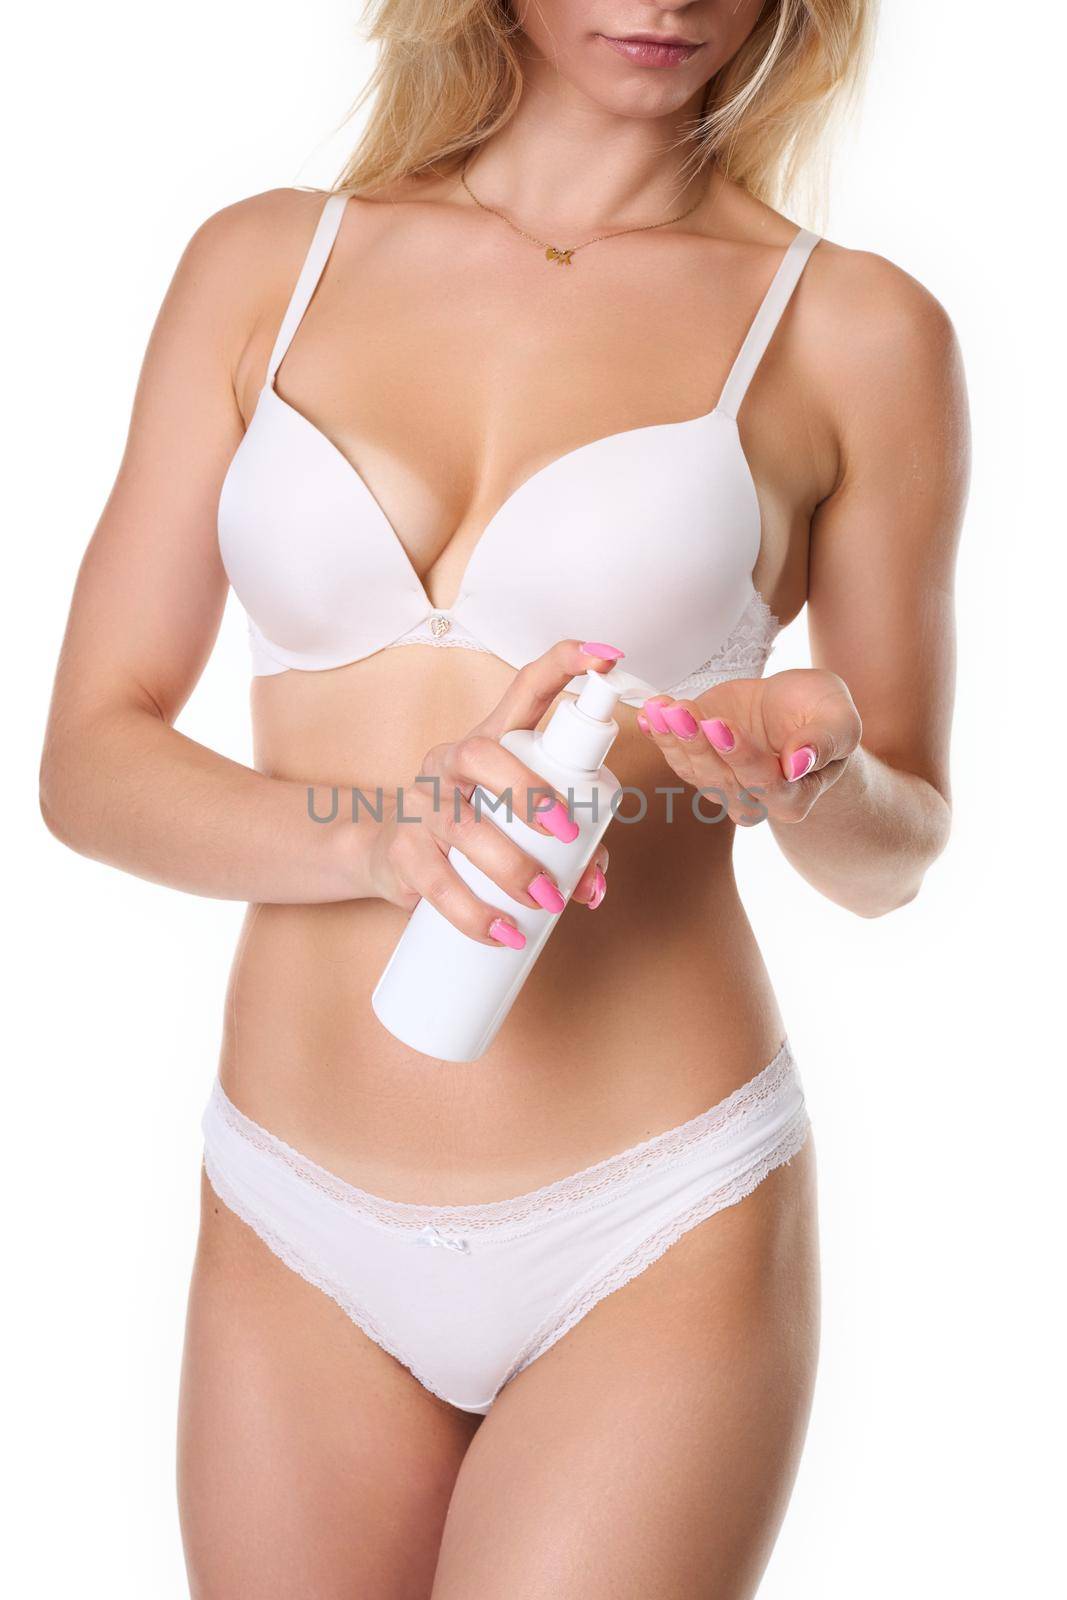 a woman with blonde hair poses in white lingerie and uses a body lotion. Photo taken in the studio. photo on a white background